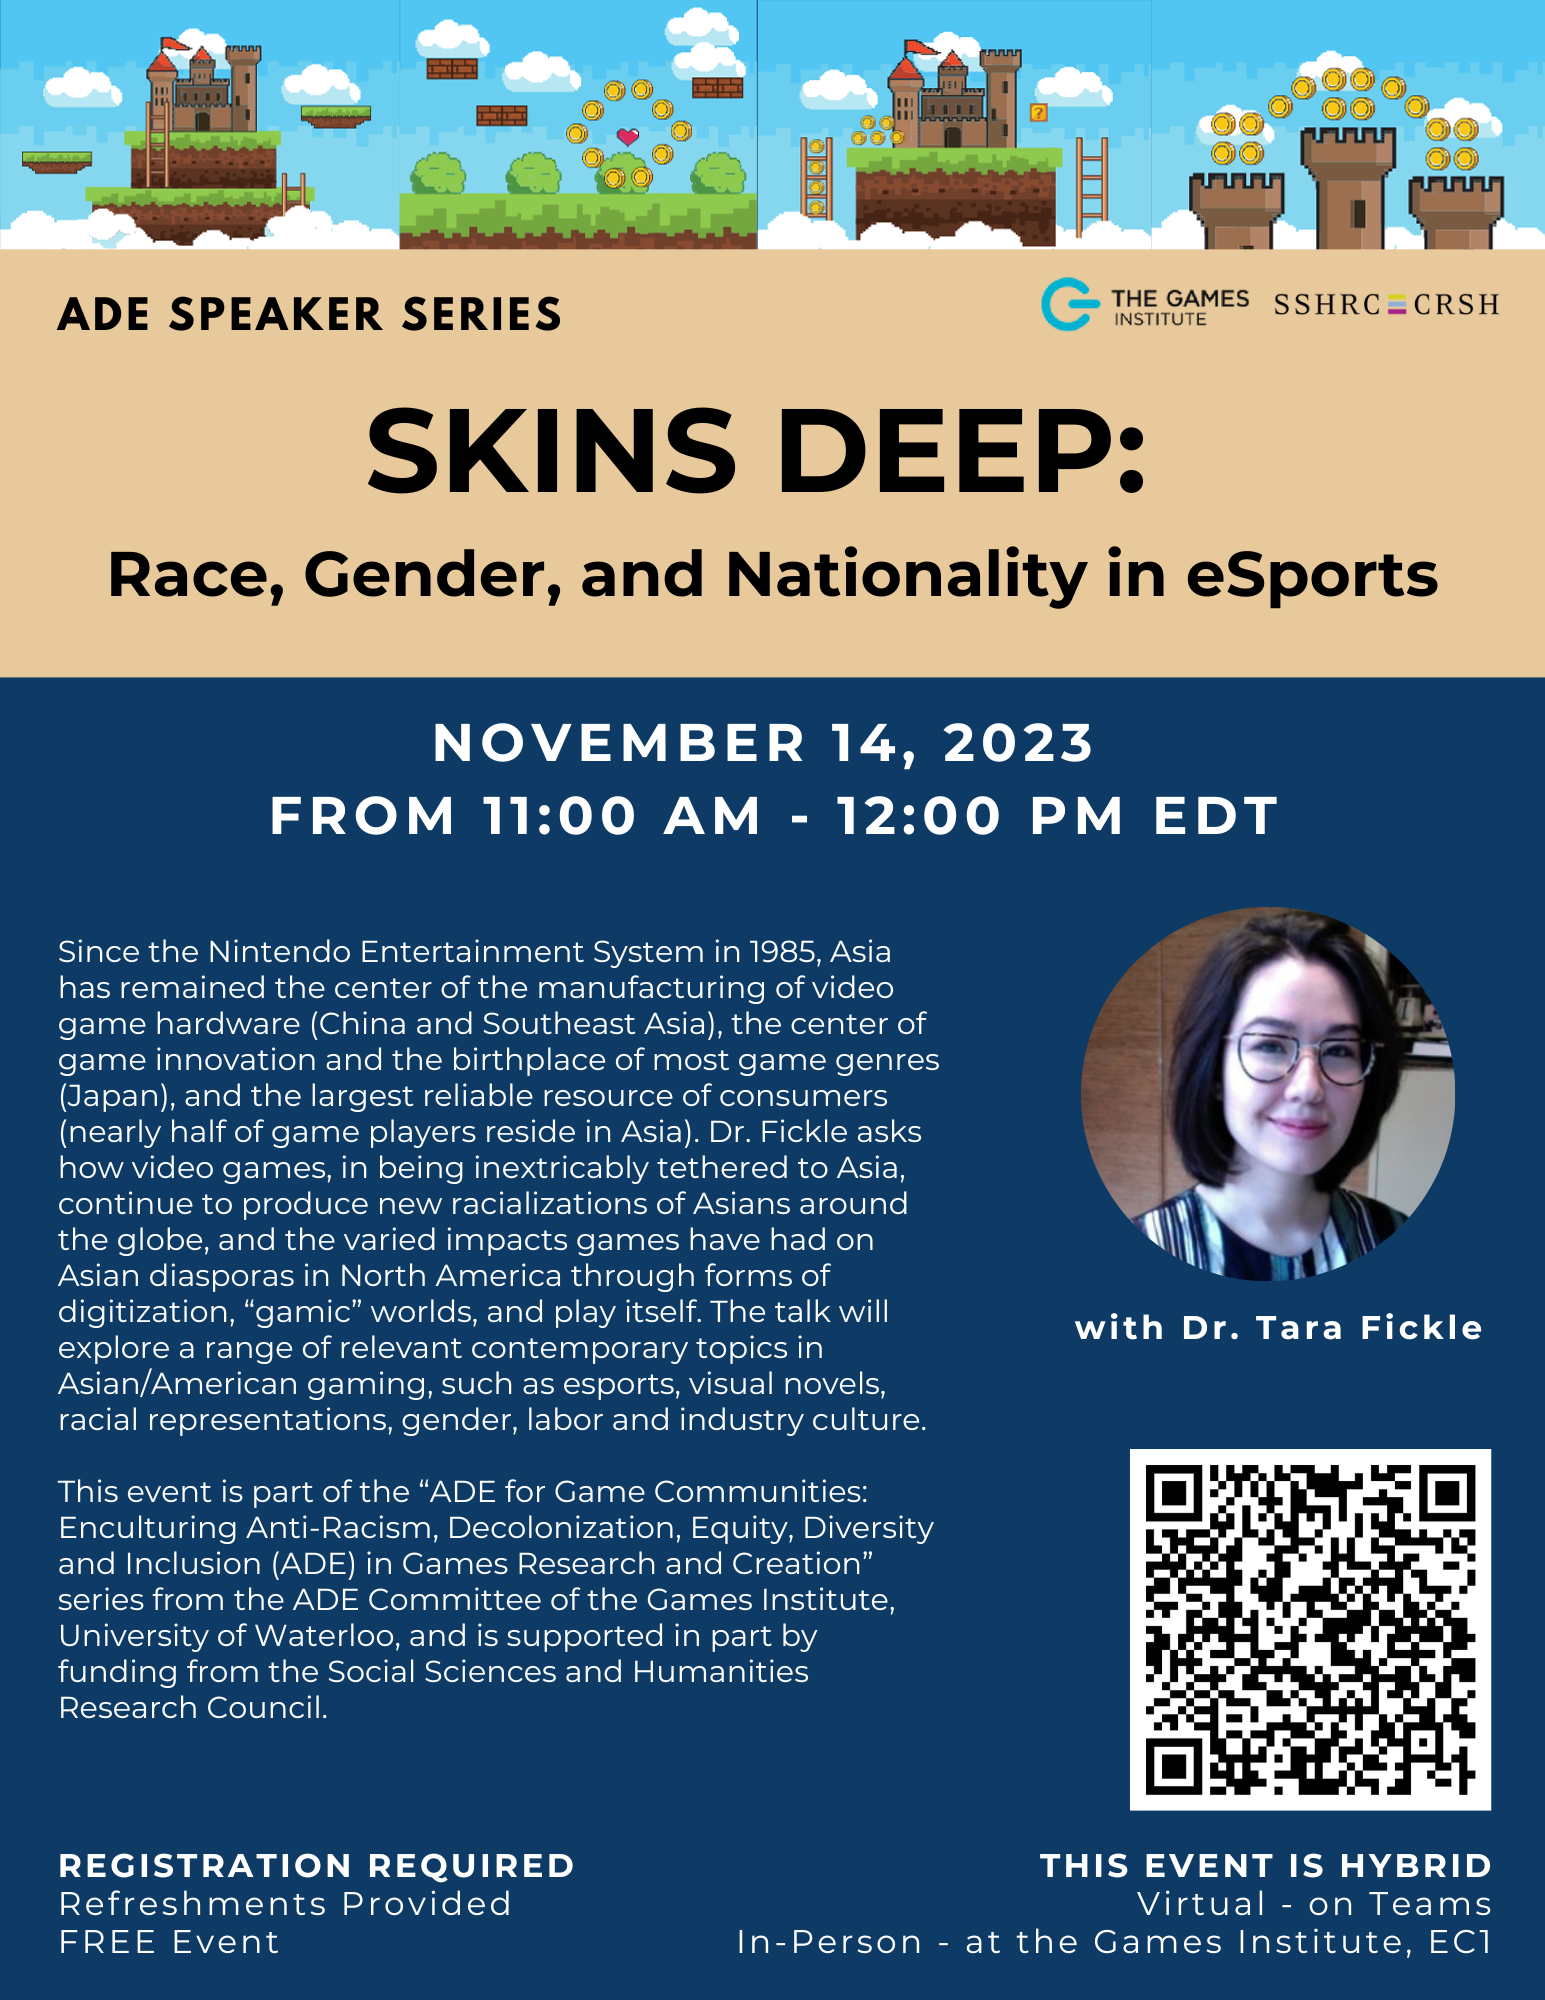 Skins Deep: Race, Gender, and Nationality in eSports